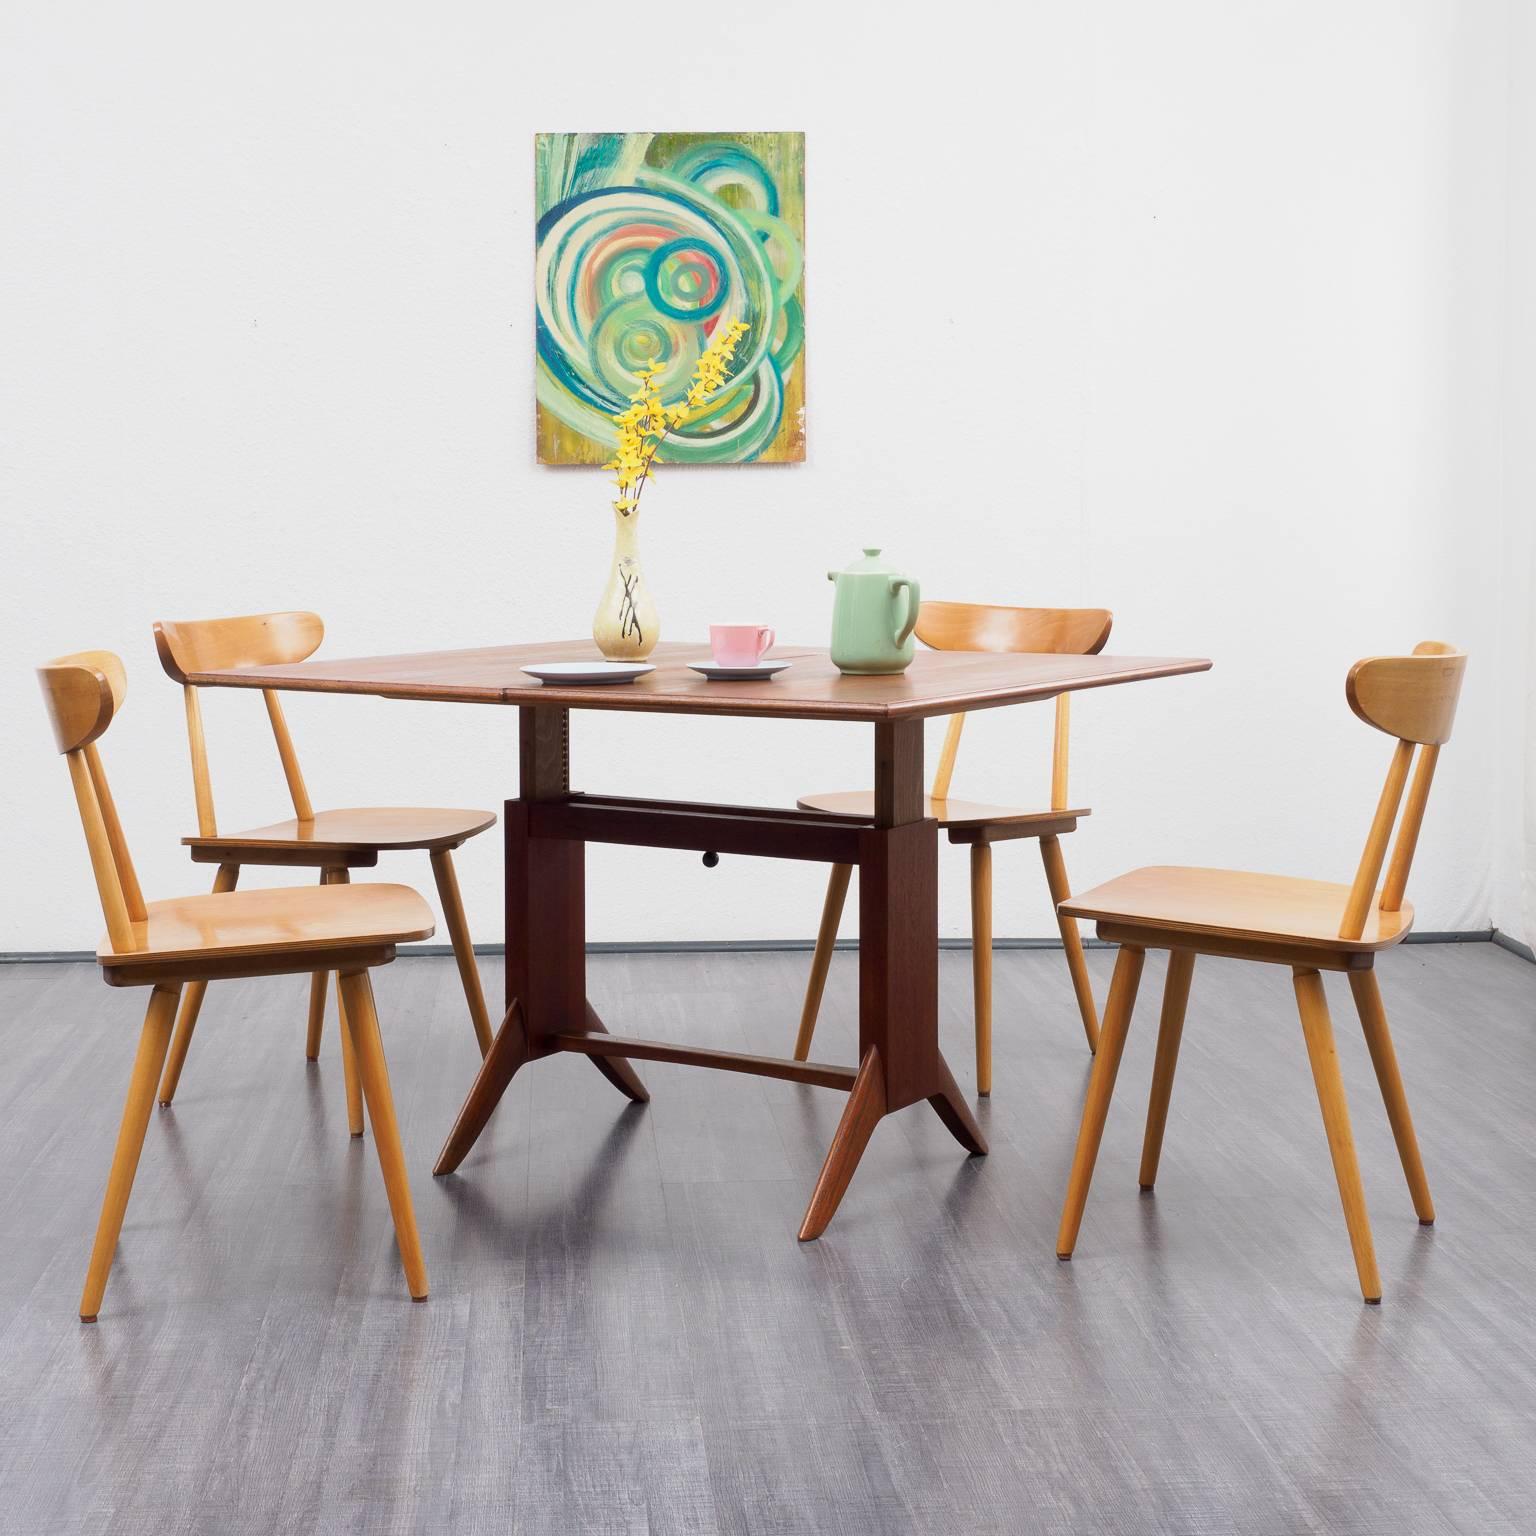 Elegant coffee or dining table from the 1950s by Wilhelm Renz. High-quality workmanship, teak-faced. The table can easily be changed from a coffee table to a dining table with large table top. It is mechanically height-adjustable and has a fold-out